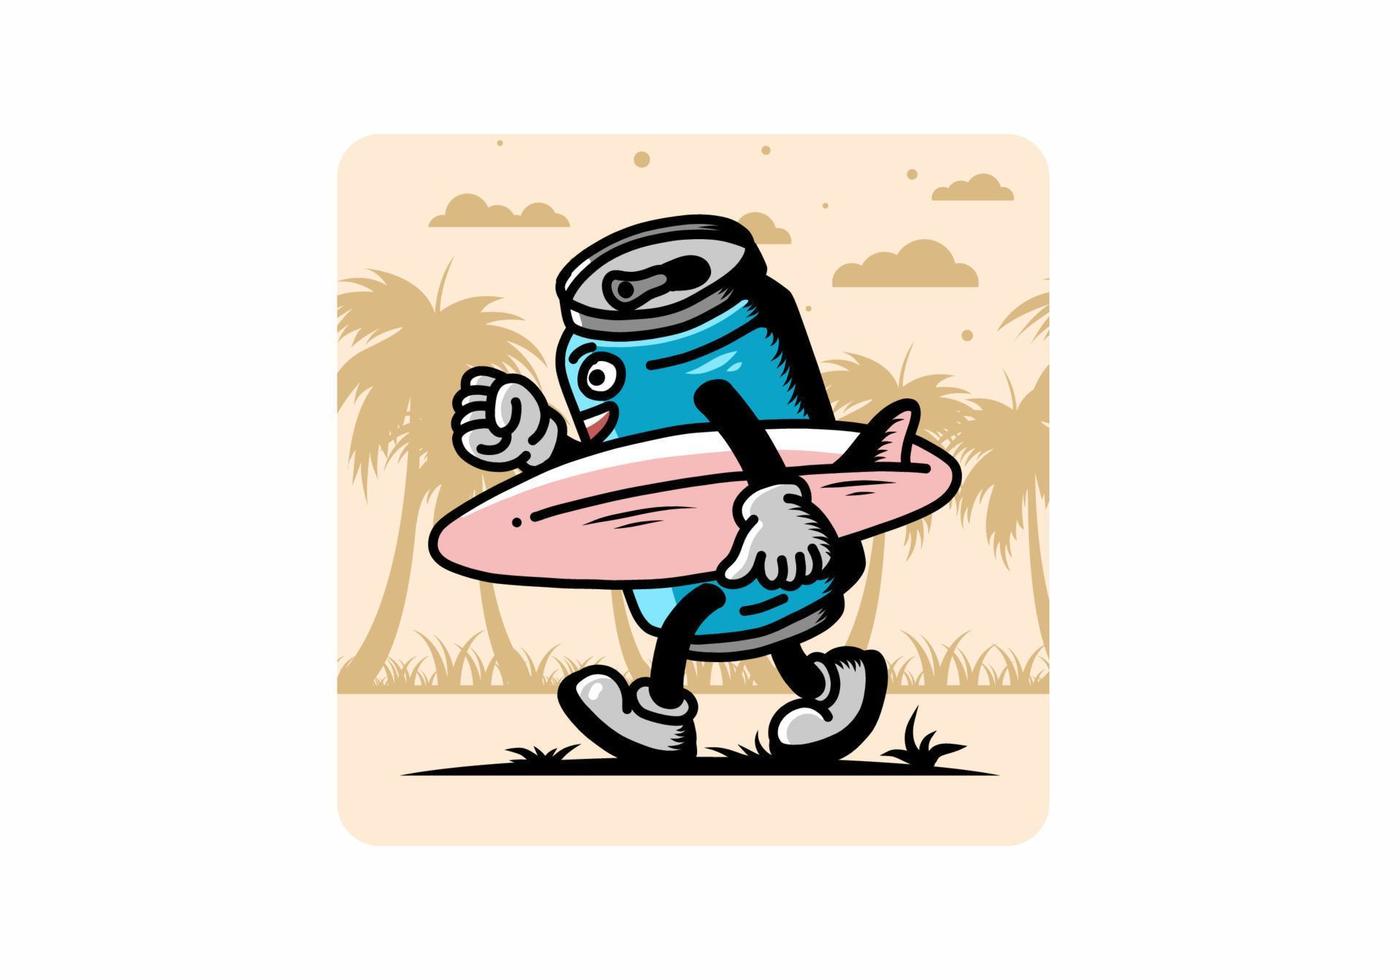 illustration of a drink can holding a surfboard vector